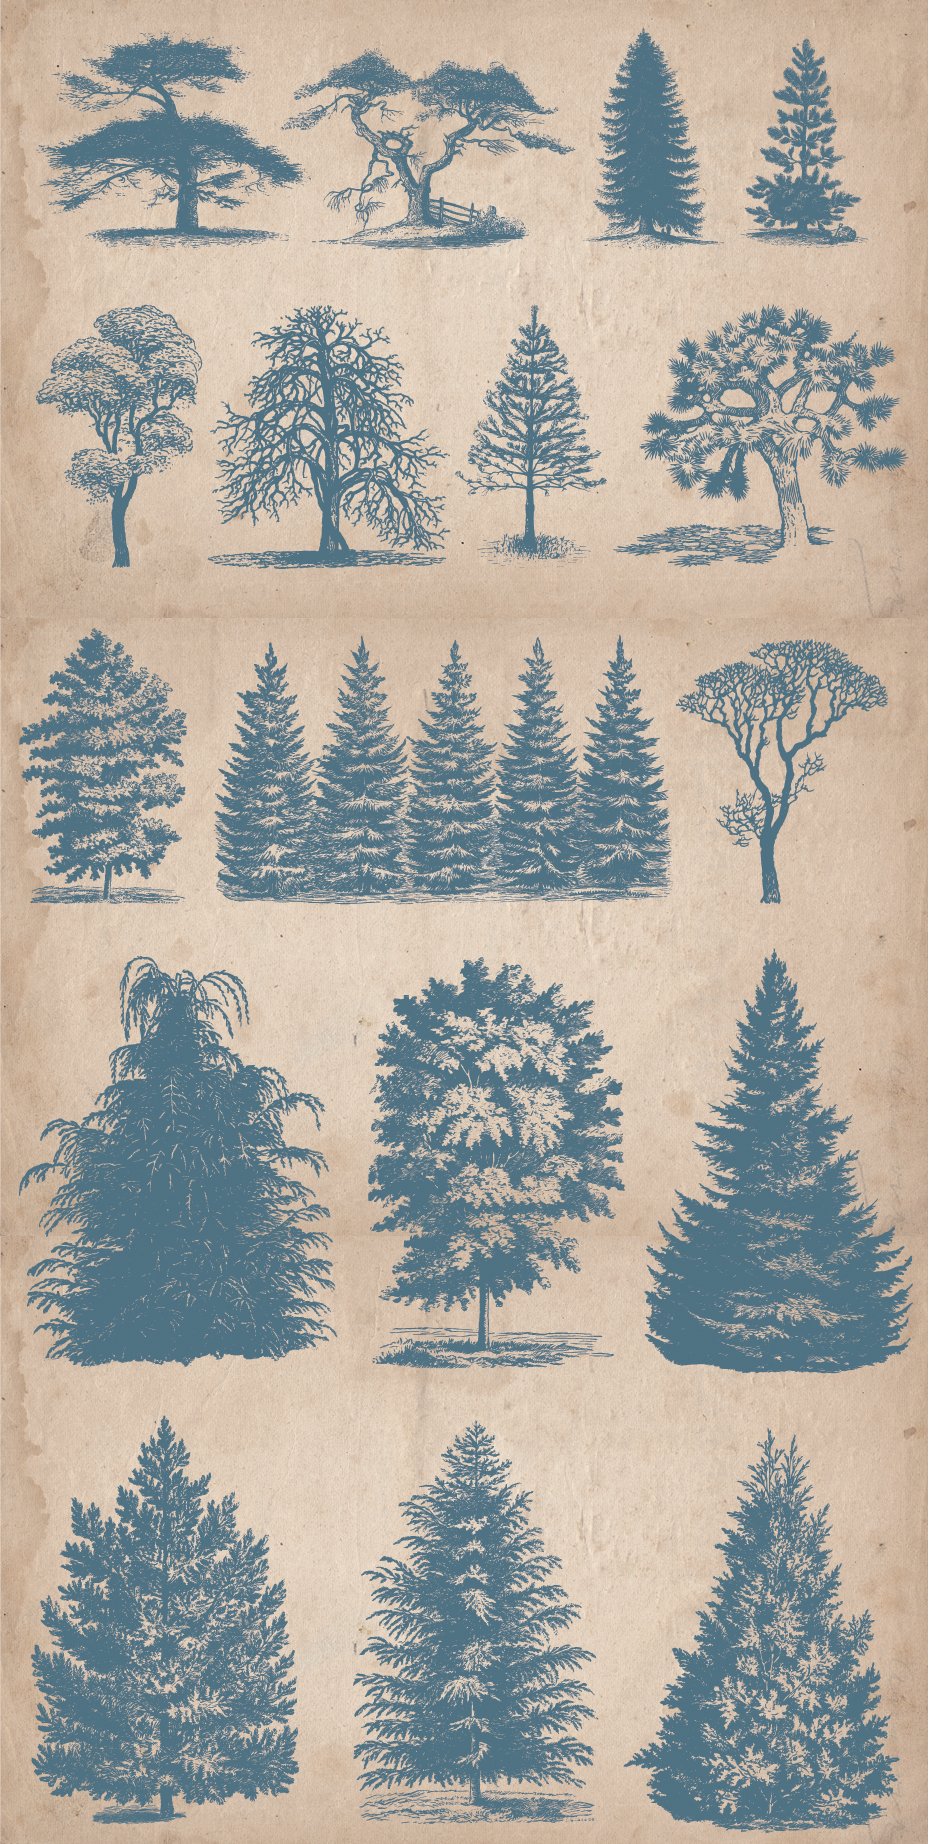 Vintage Illustrations - Trees preview image.